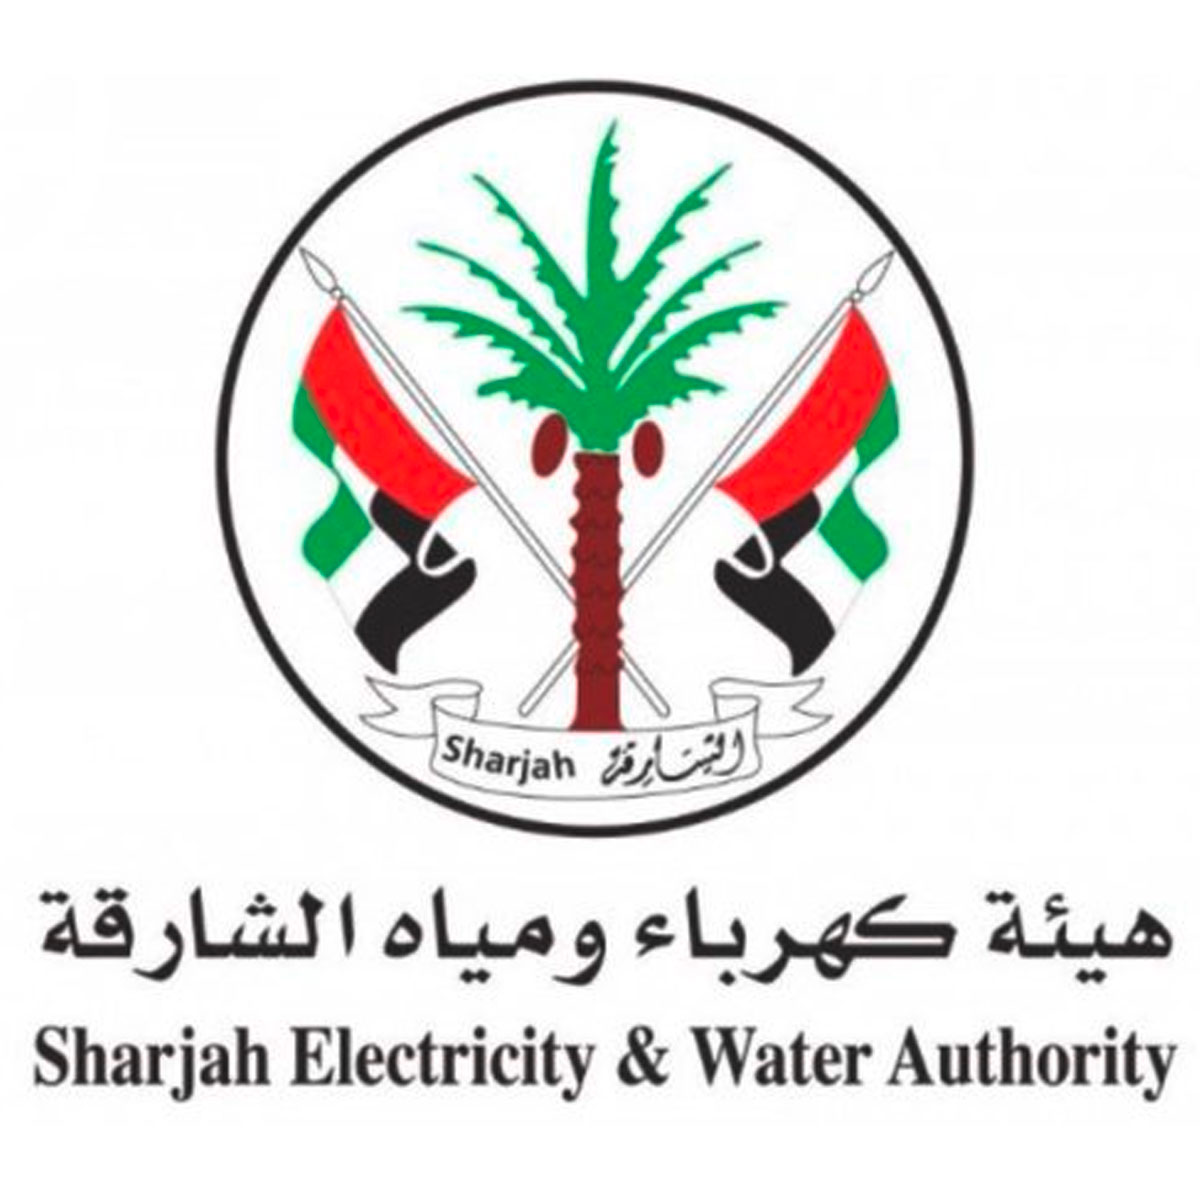 Sharjah Electricity: SCAM’s Institutional Customer